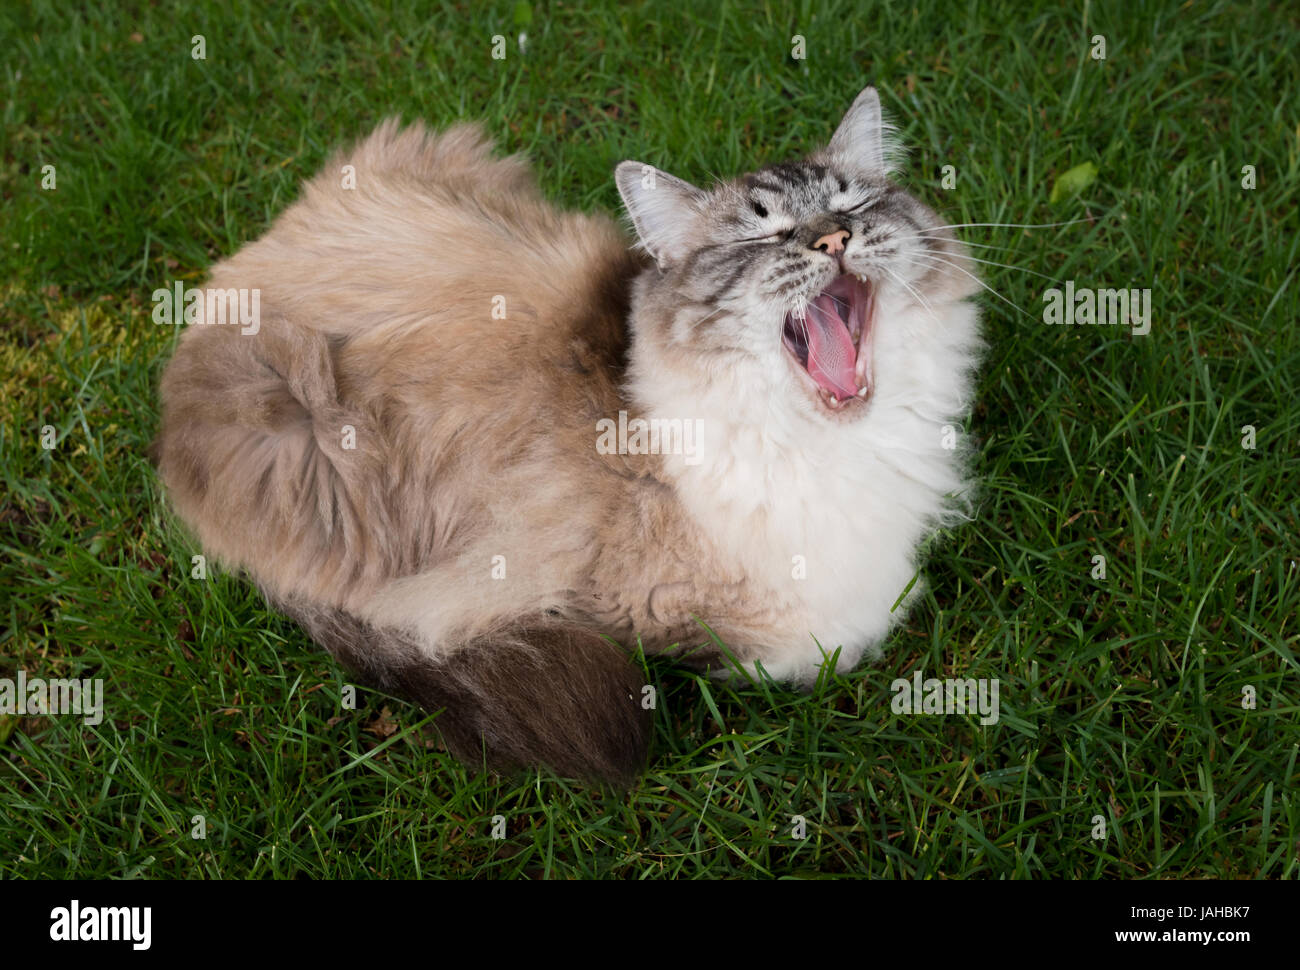 Ragdoll Sitting On A Grass Lawn With Wide Mouth Sneezing. Stock Photo